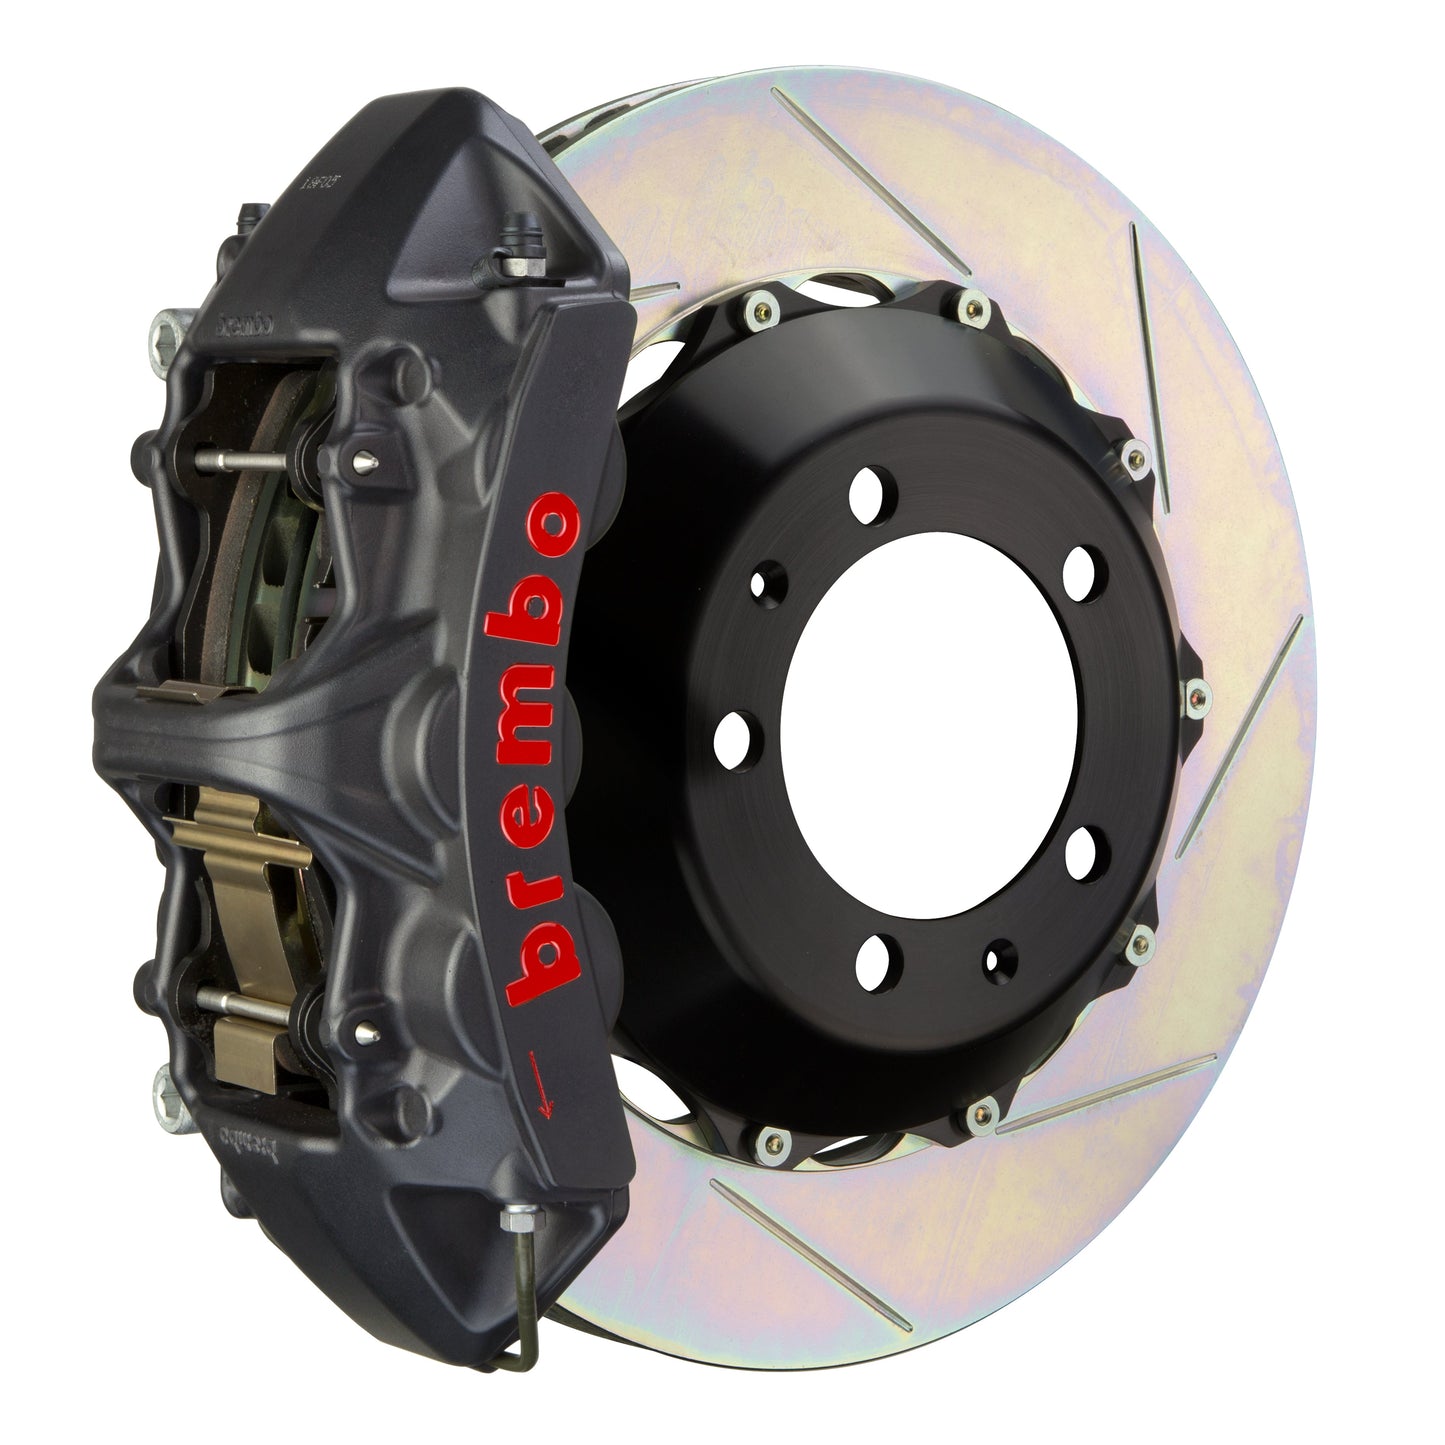 Front Brembo Gran Turismo Braking Upgrade Kit (1M19008AS) GT / S6 Caliper with 6-Pistons & 2-piece 380x32 Disc